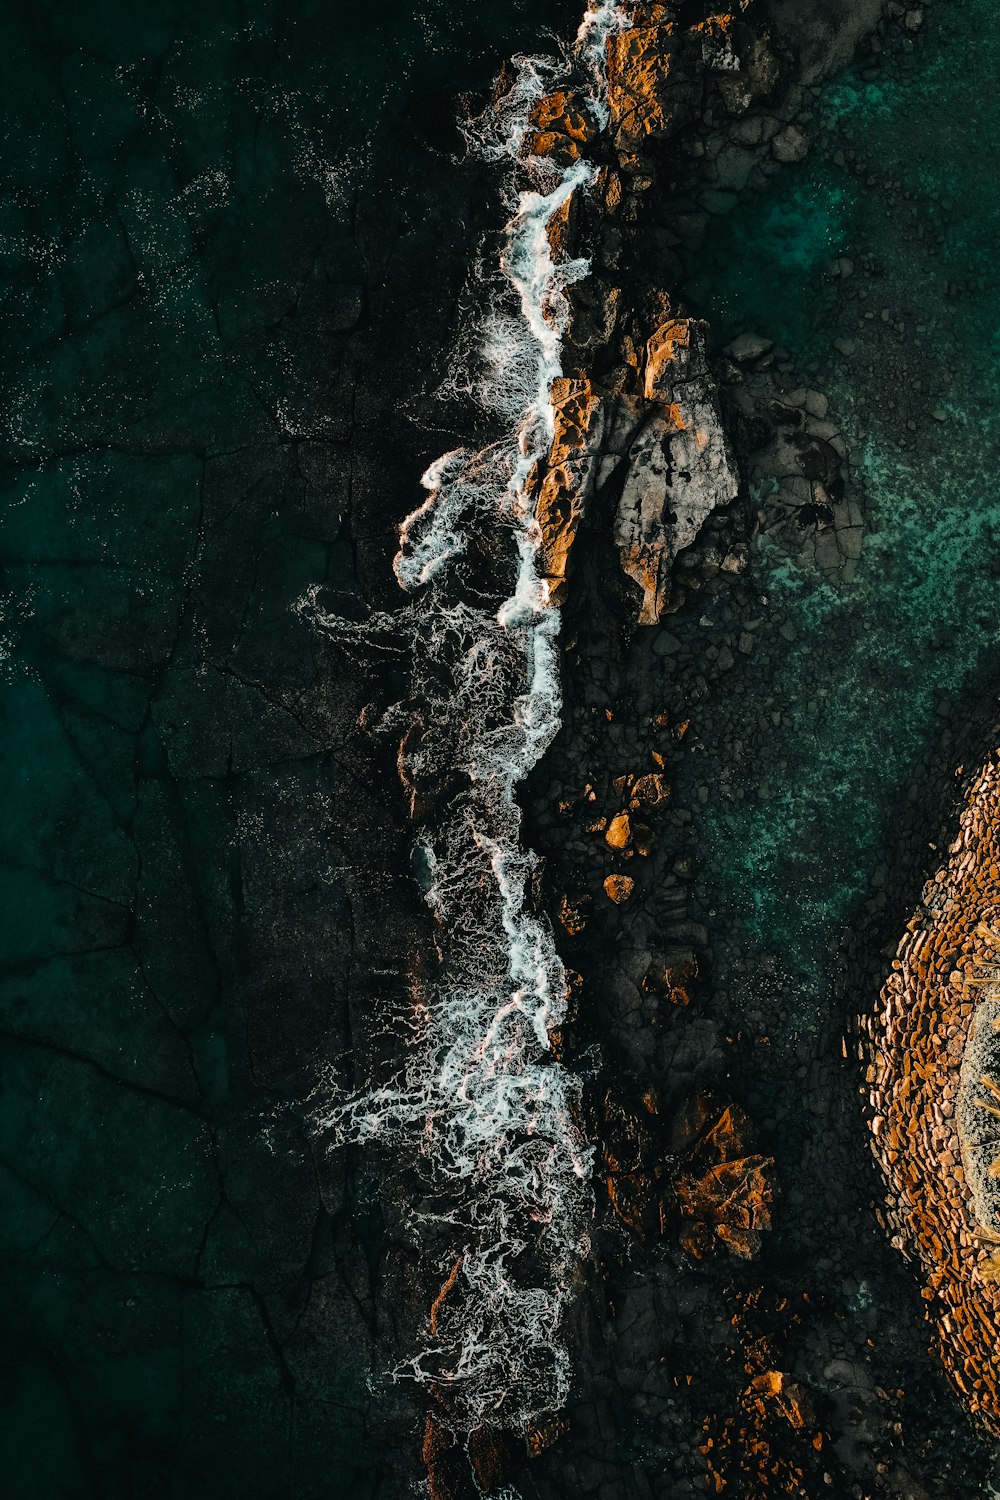 750+ Oneplus Wallpaper Pictures | Download Free Images on Unsplash